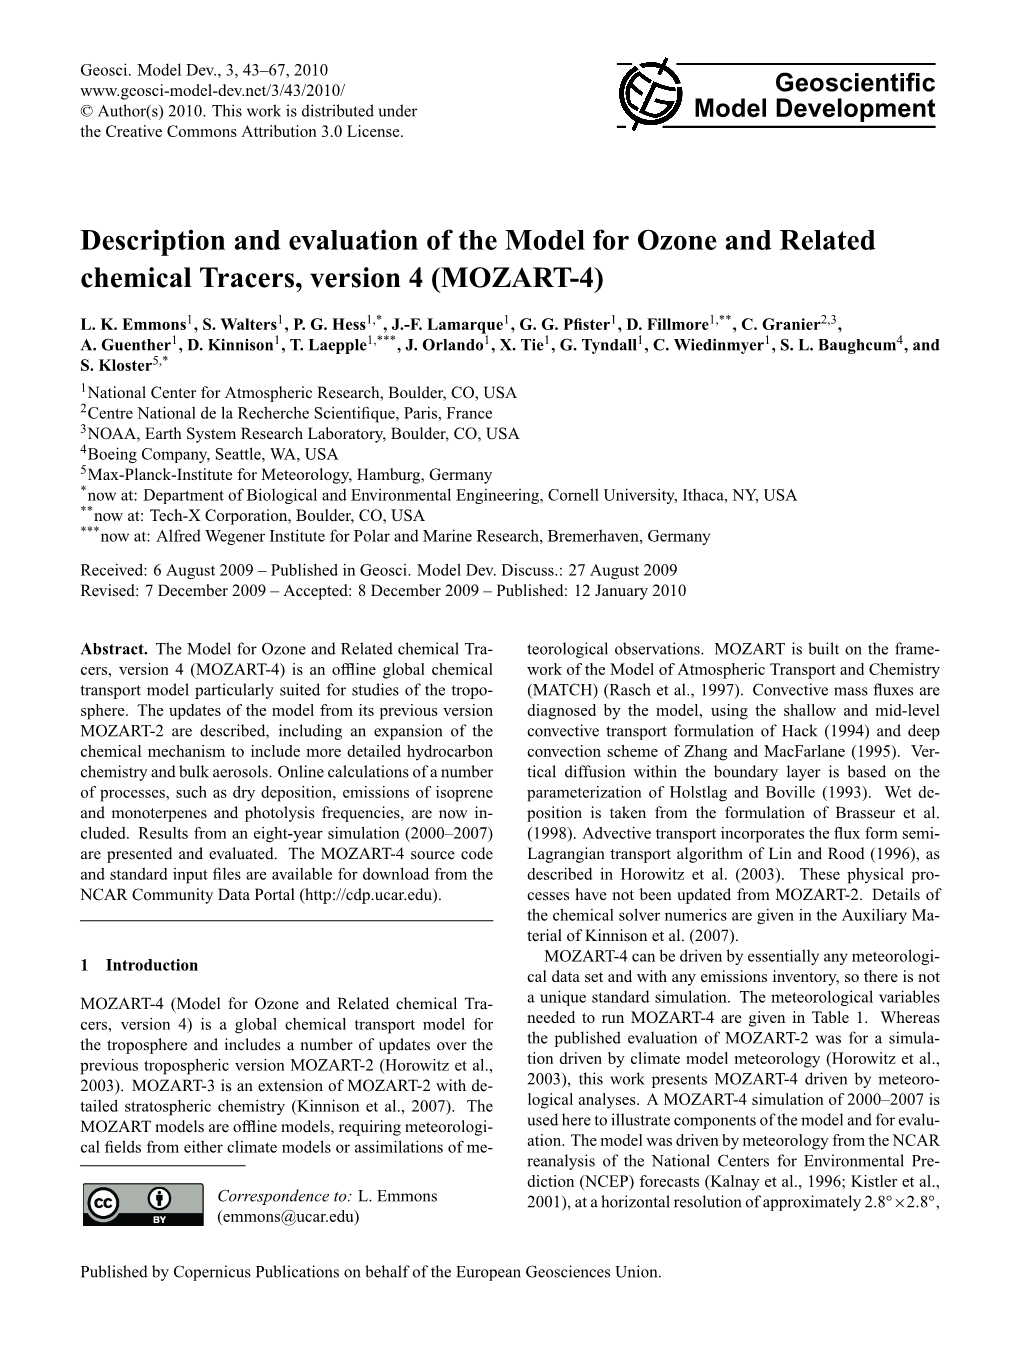 Description and Evaluation of the Model for Ozone and Related Chemical Tracers, Version 4 (MOZART-4)